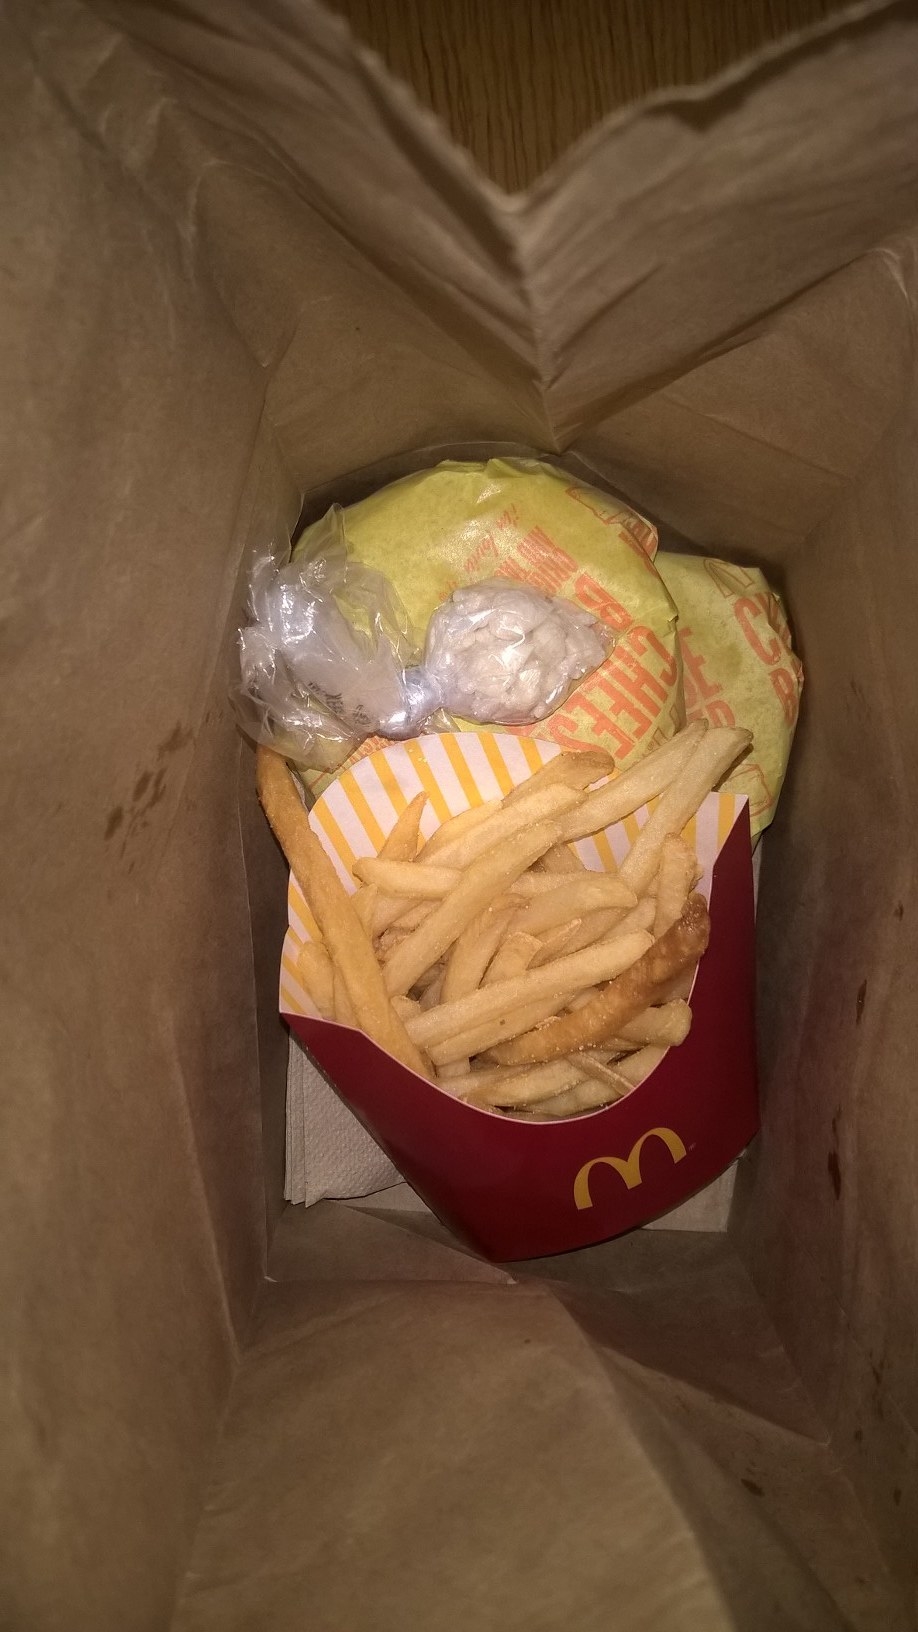 A McDonald's Manager Got Busted Allegedly Selling Cocaine By Hiding It ...